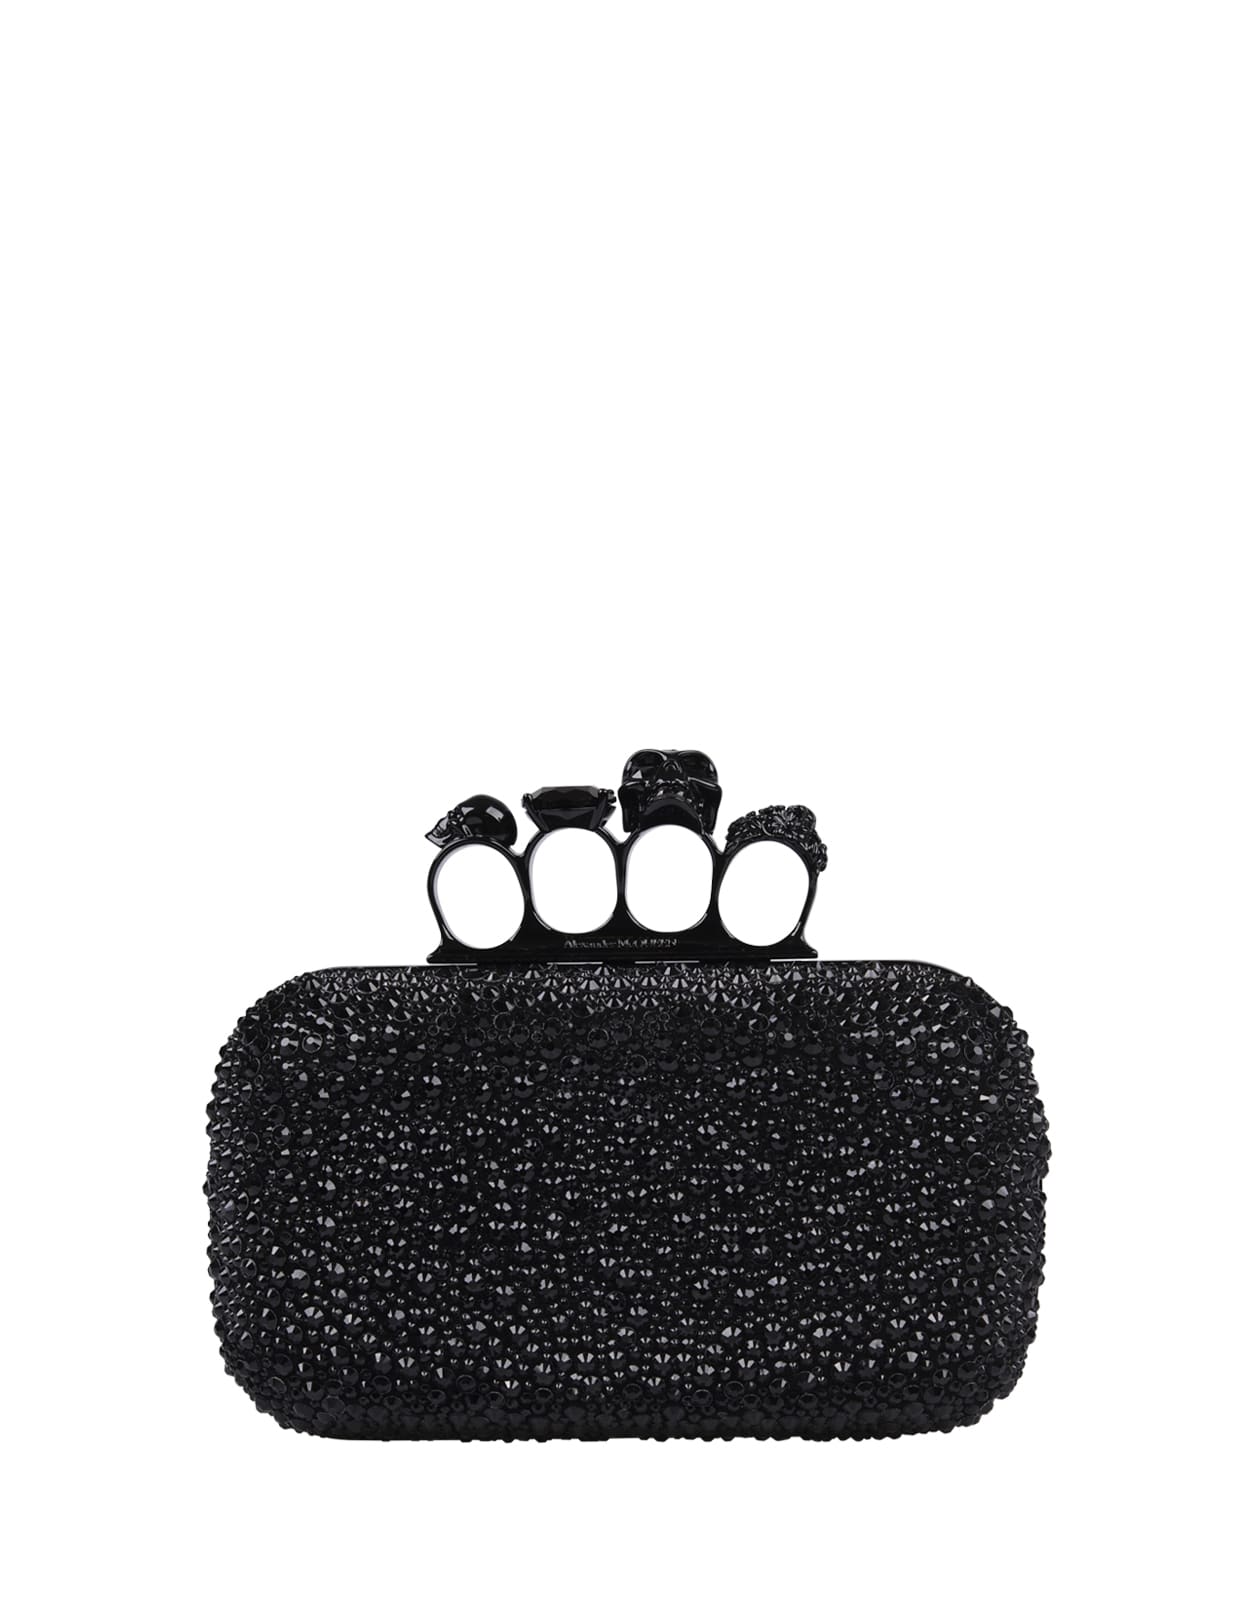 ALEXANDER MCQUEEN BLACK SKULL FOUR RING CLUTCH BAG WITH CHAIN